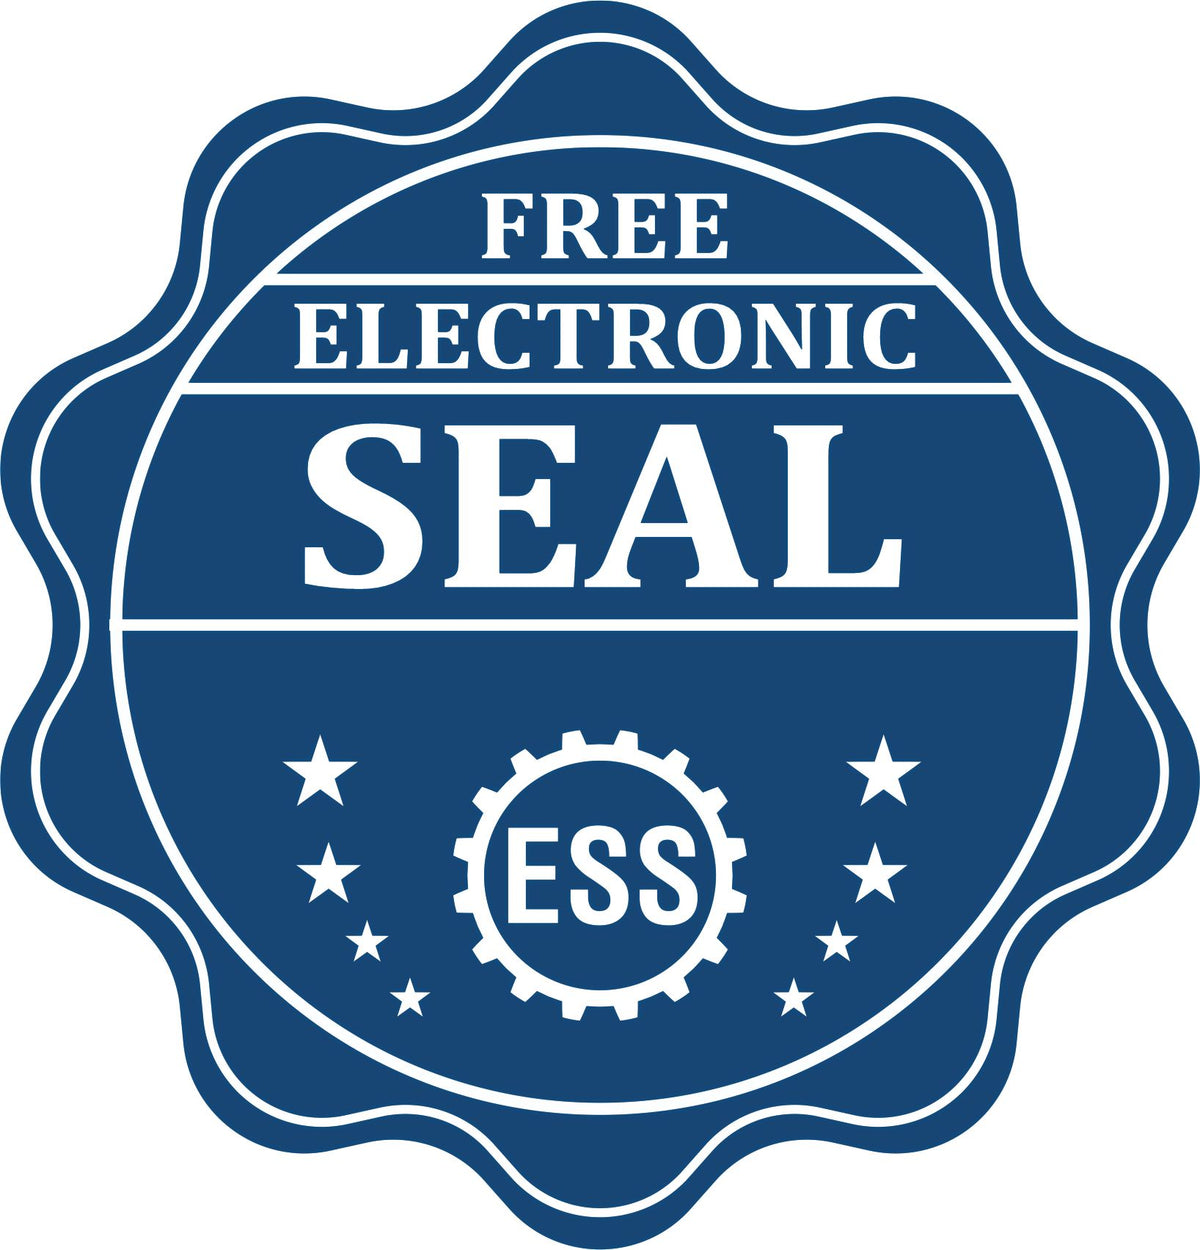 A badge showing a free electronic seal for the Handheld Guam Land Surveyor Seal with stars and the ESS gear on the emblem.